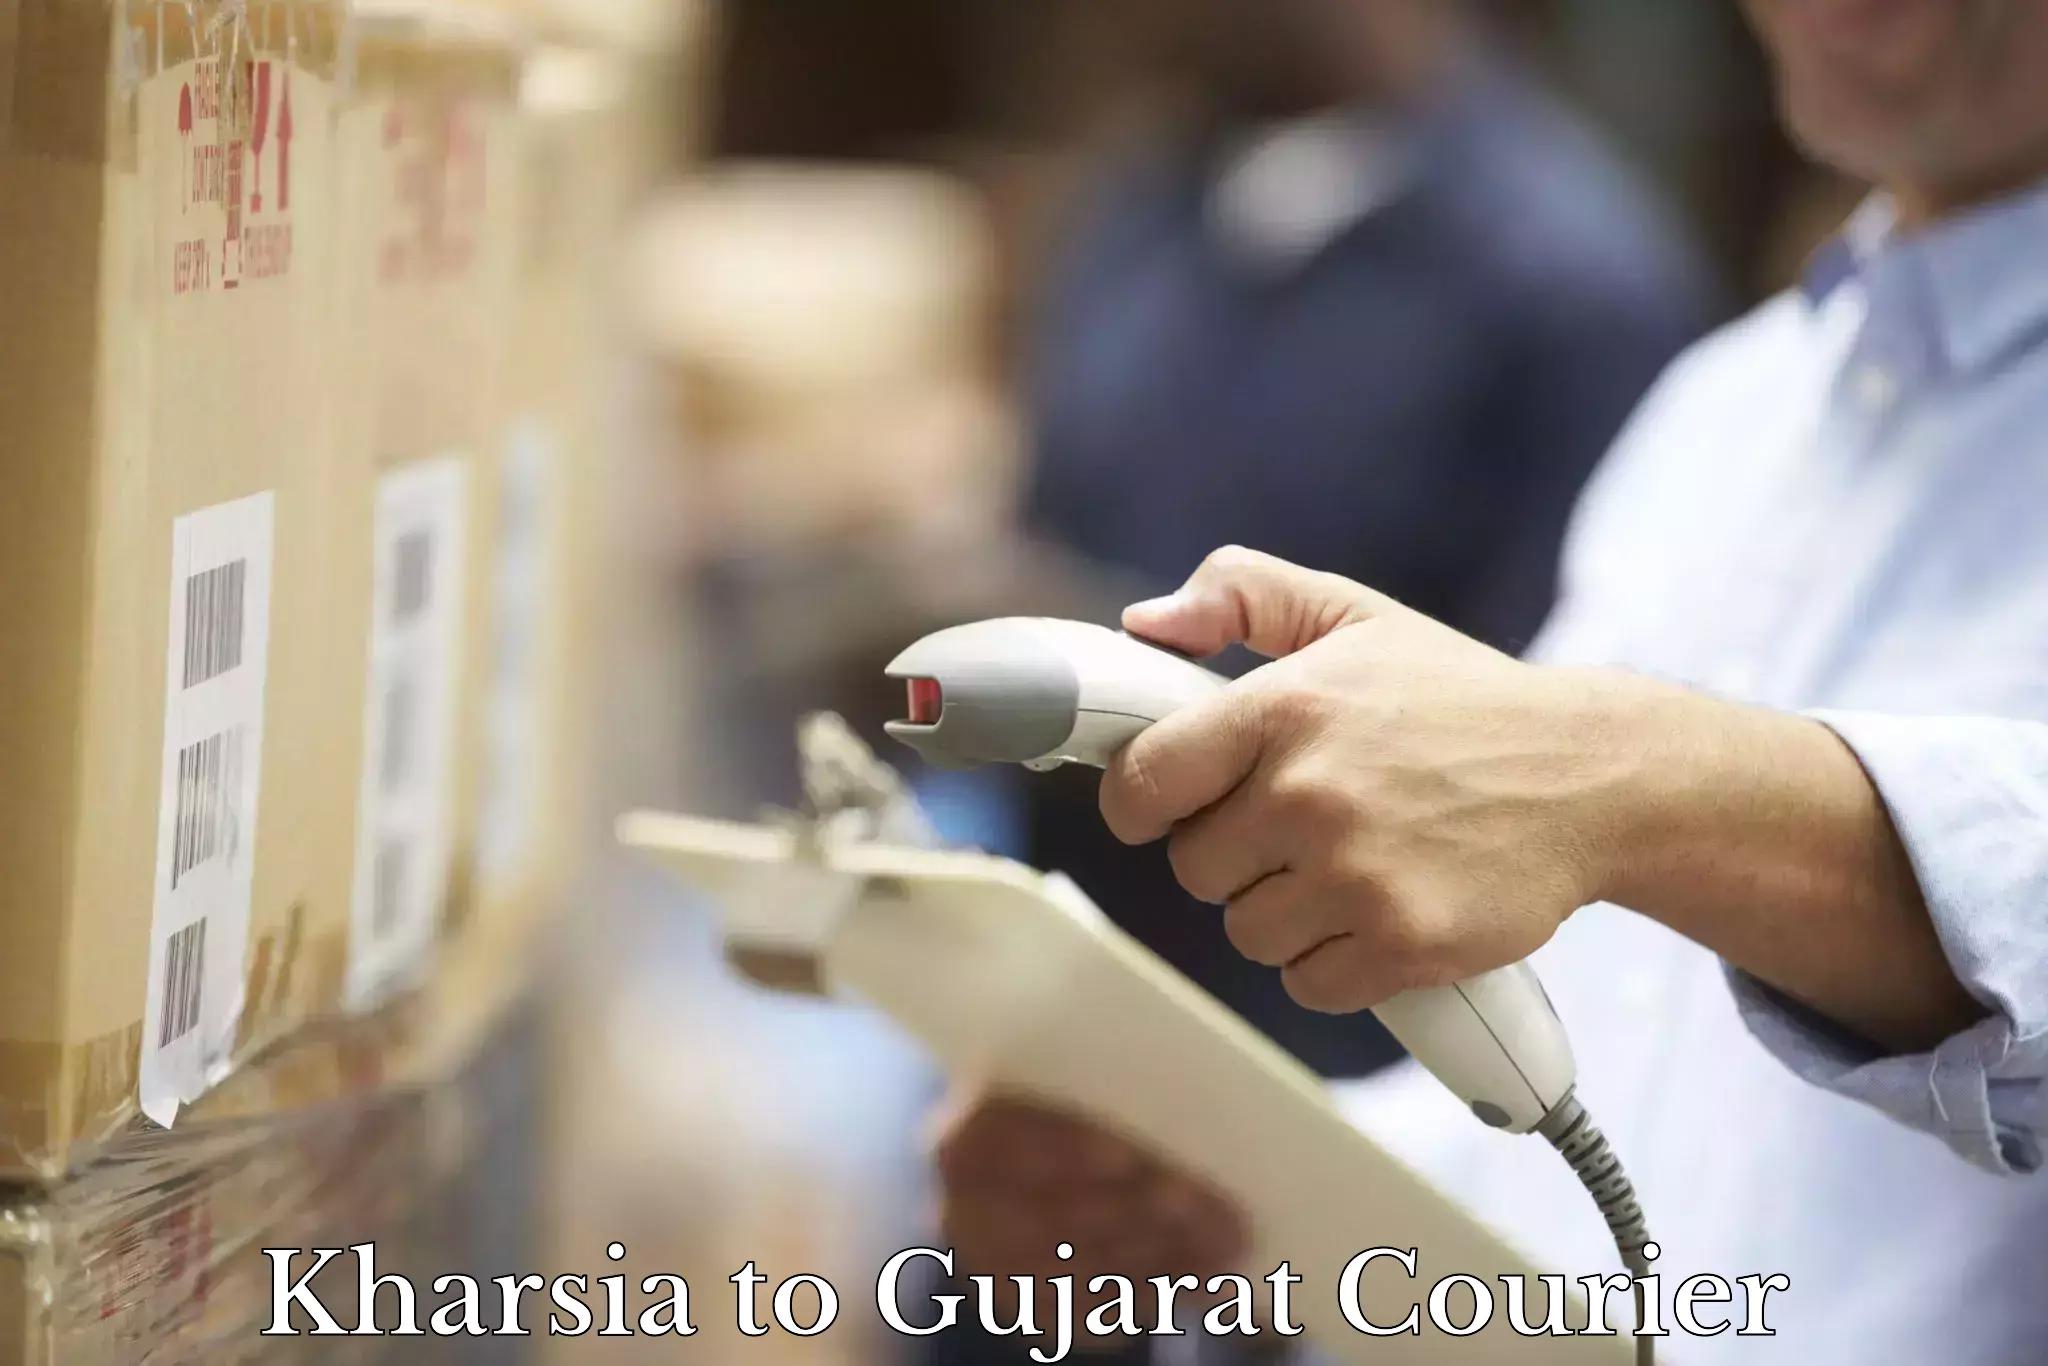 Express delivery solutions Kharsia to Ahmedabad